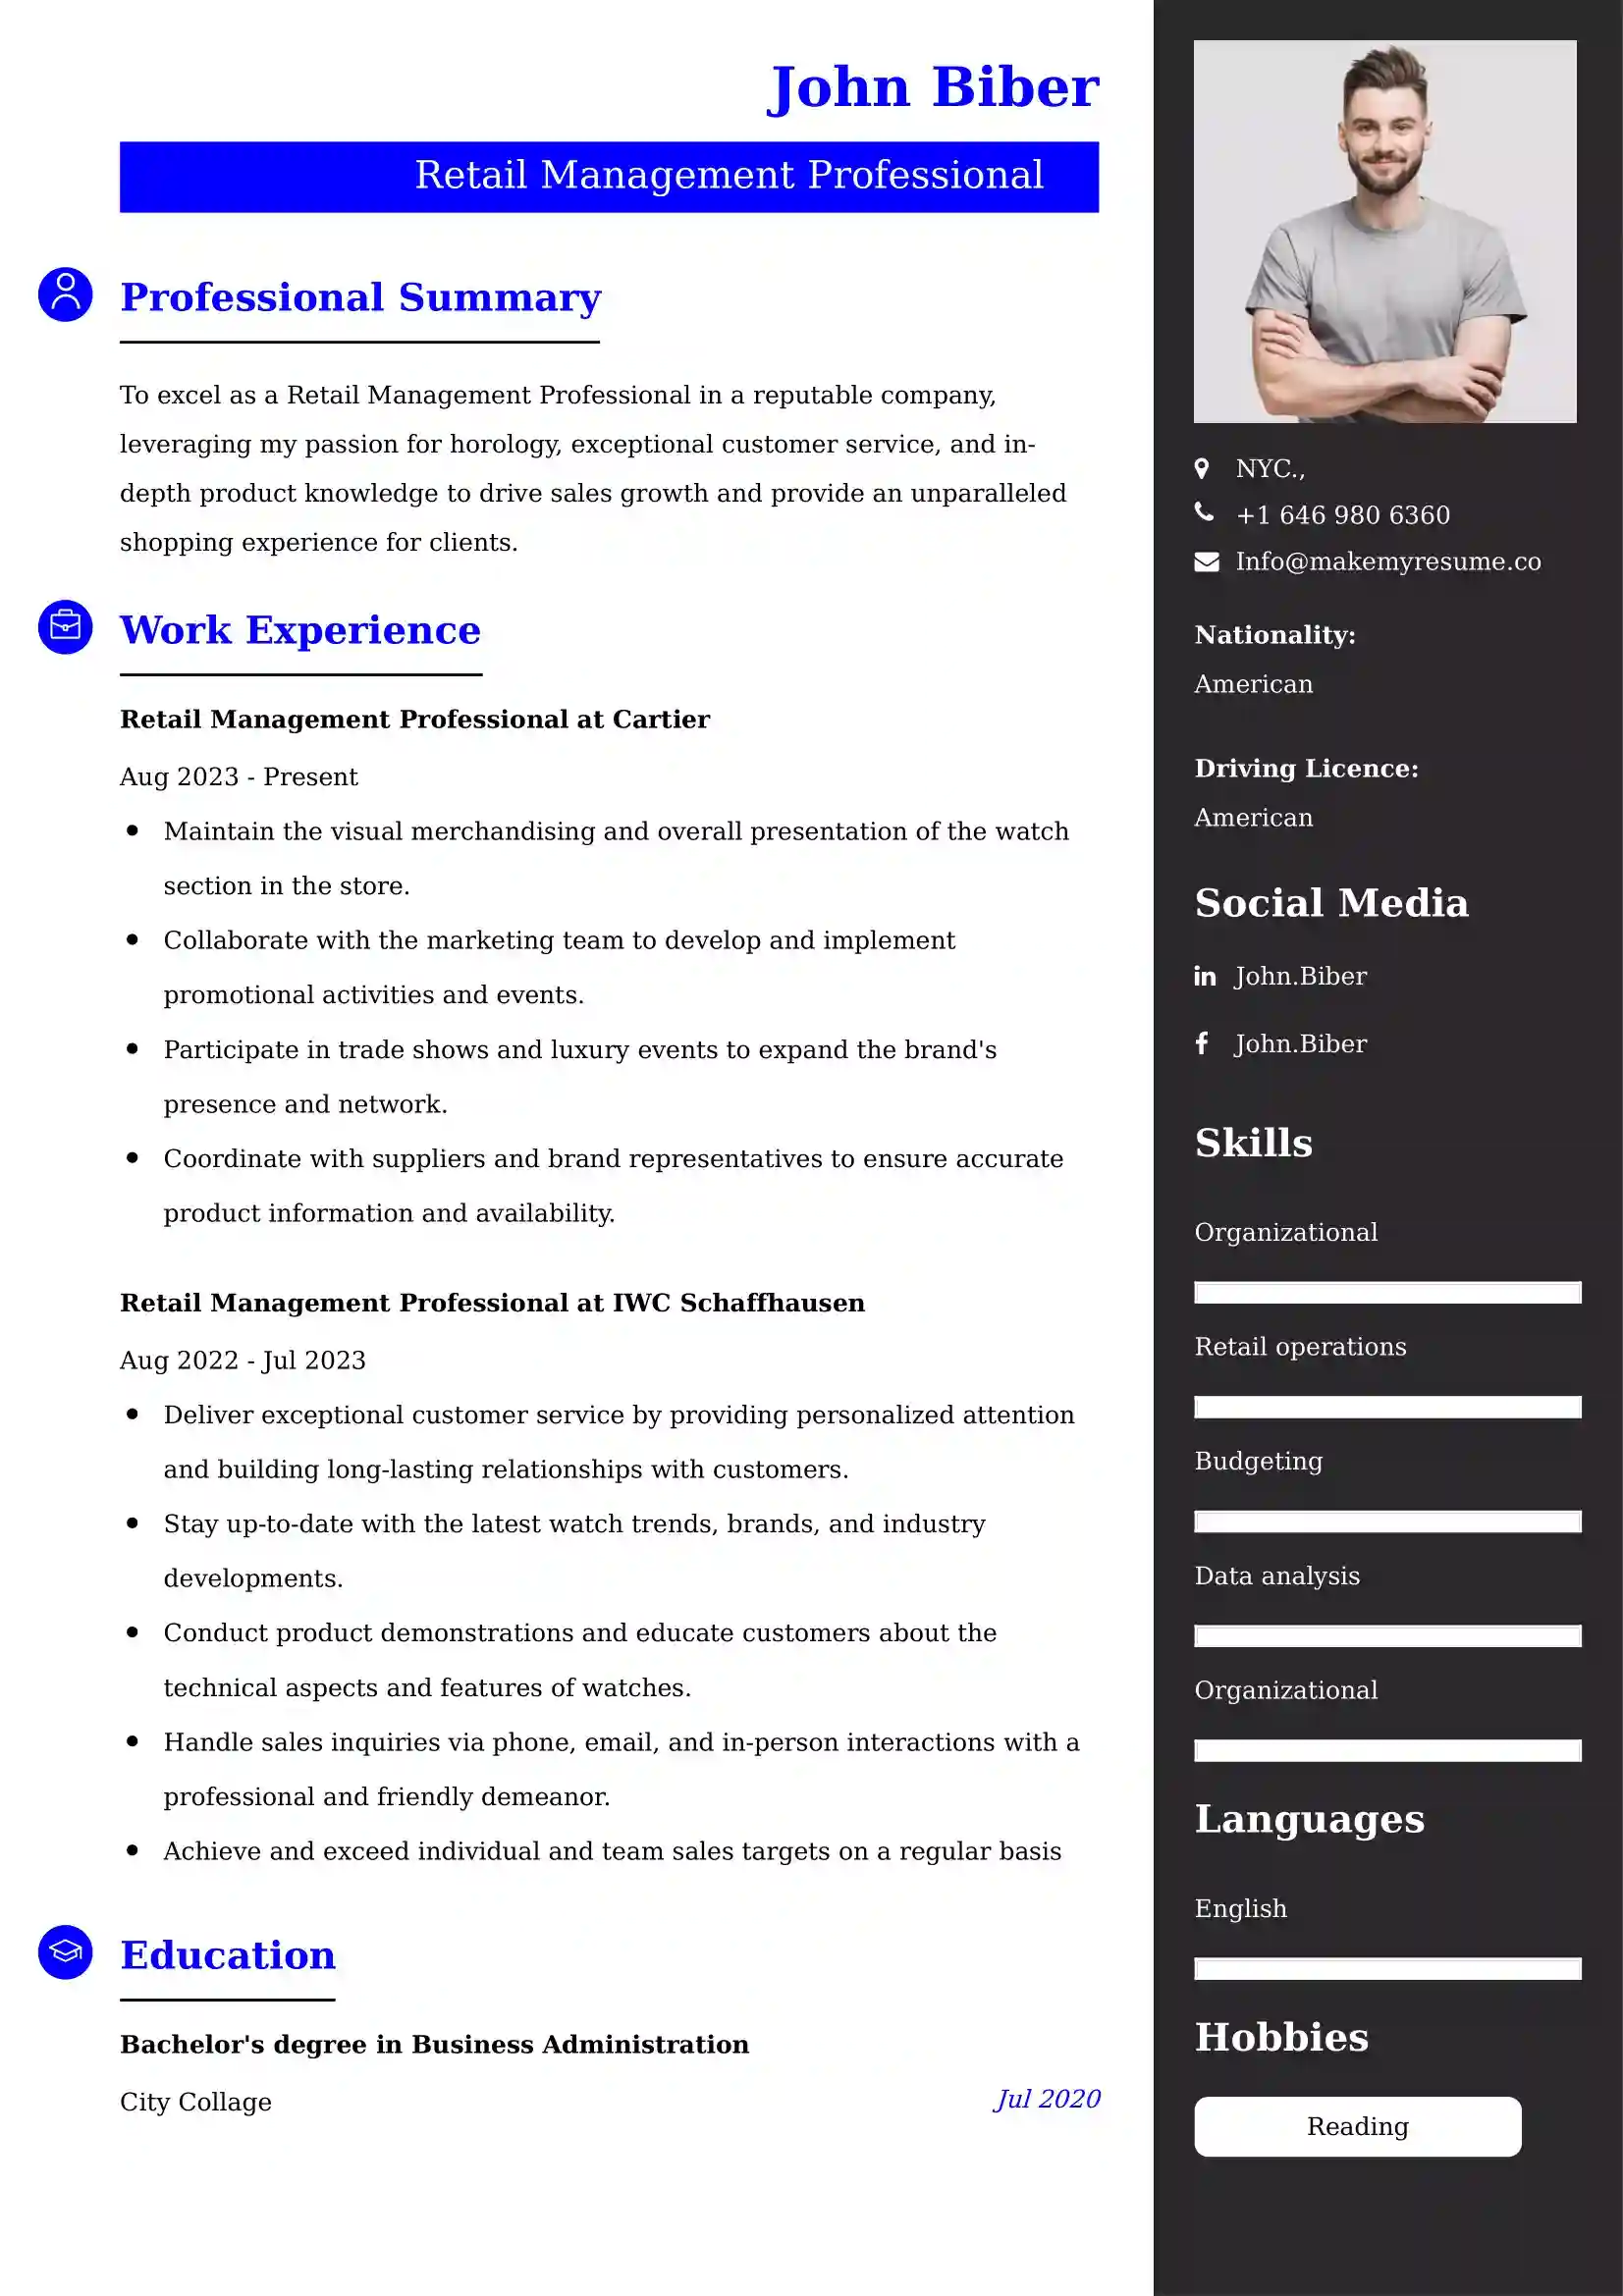 Retail Management Professional Resume Examples - UK Format, Latest Template.